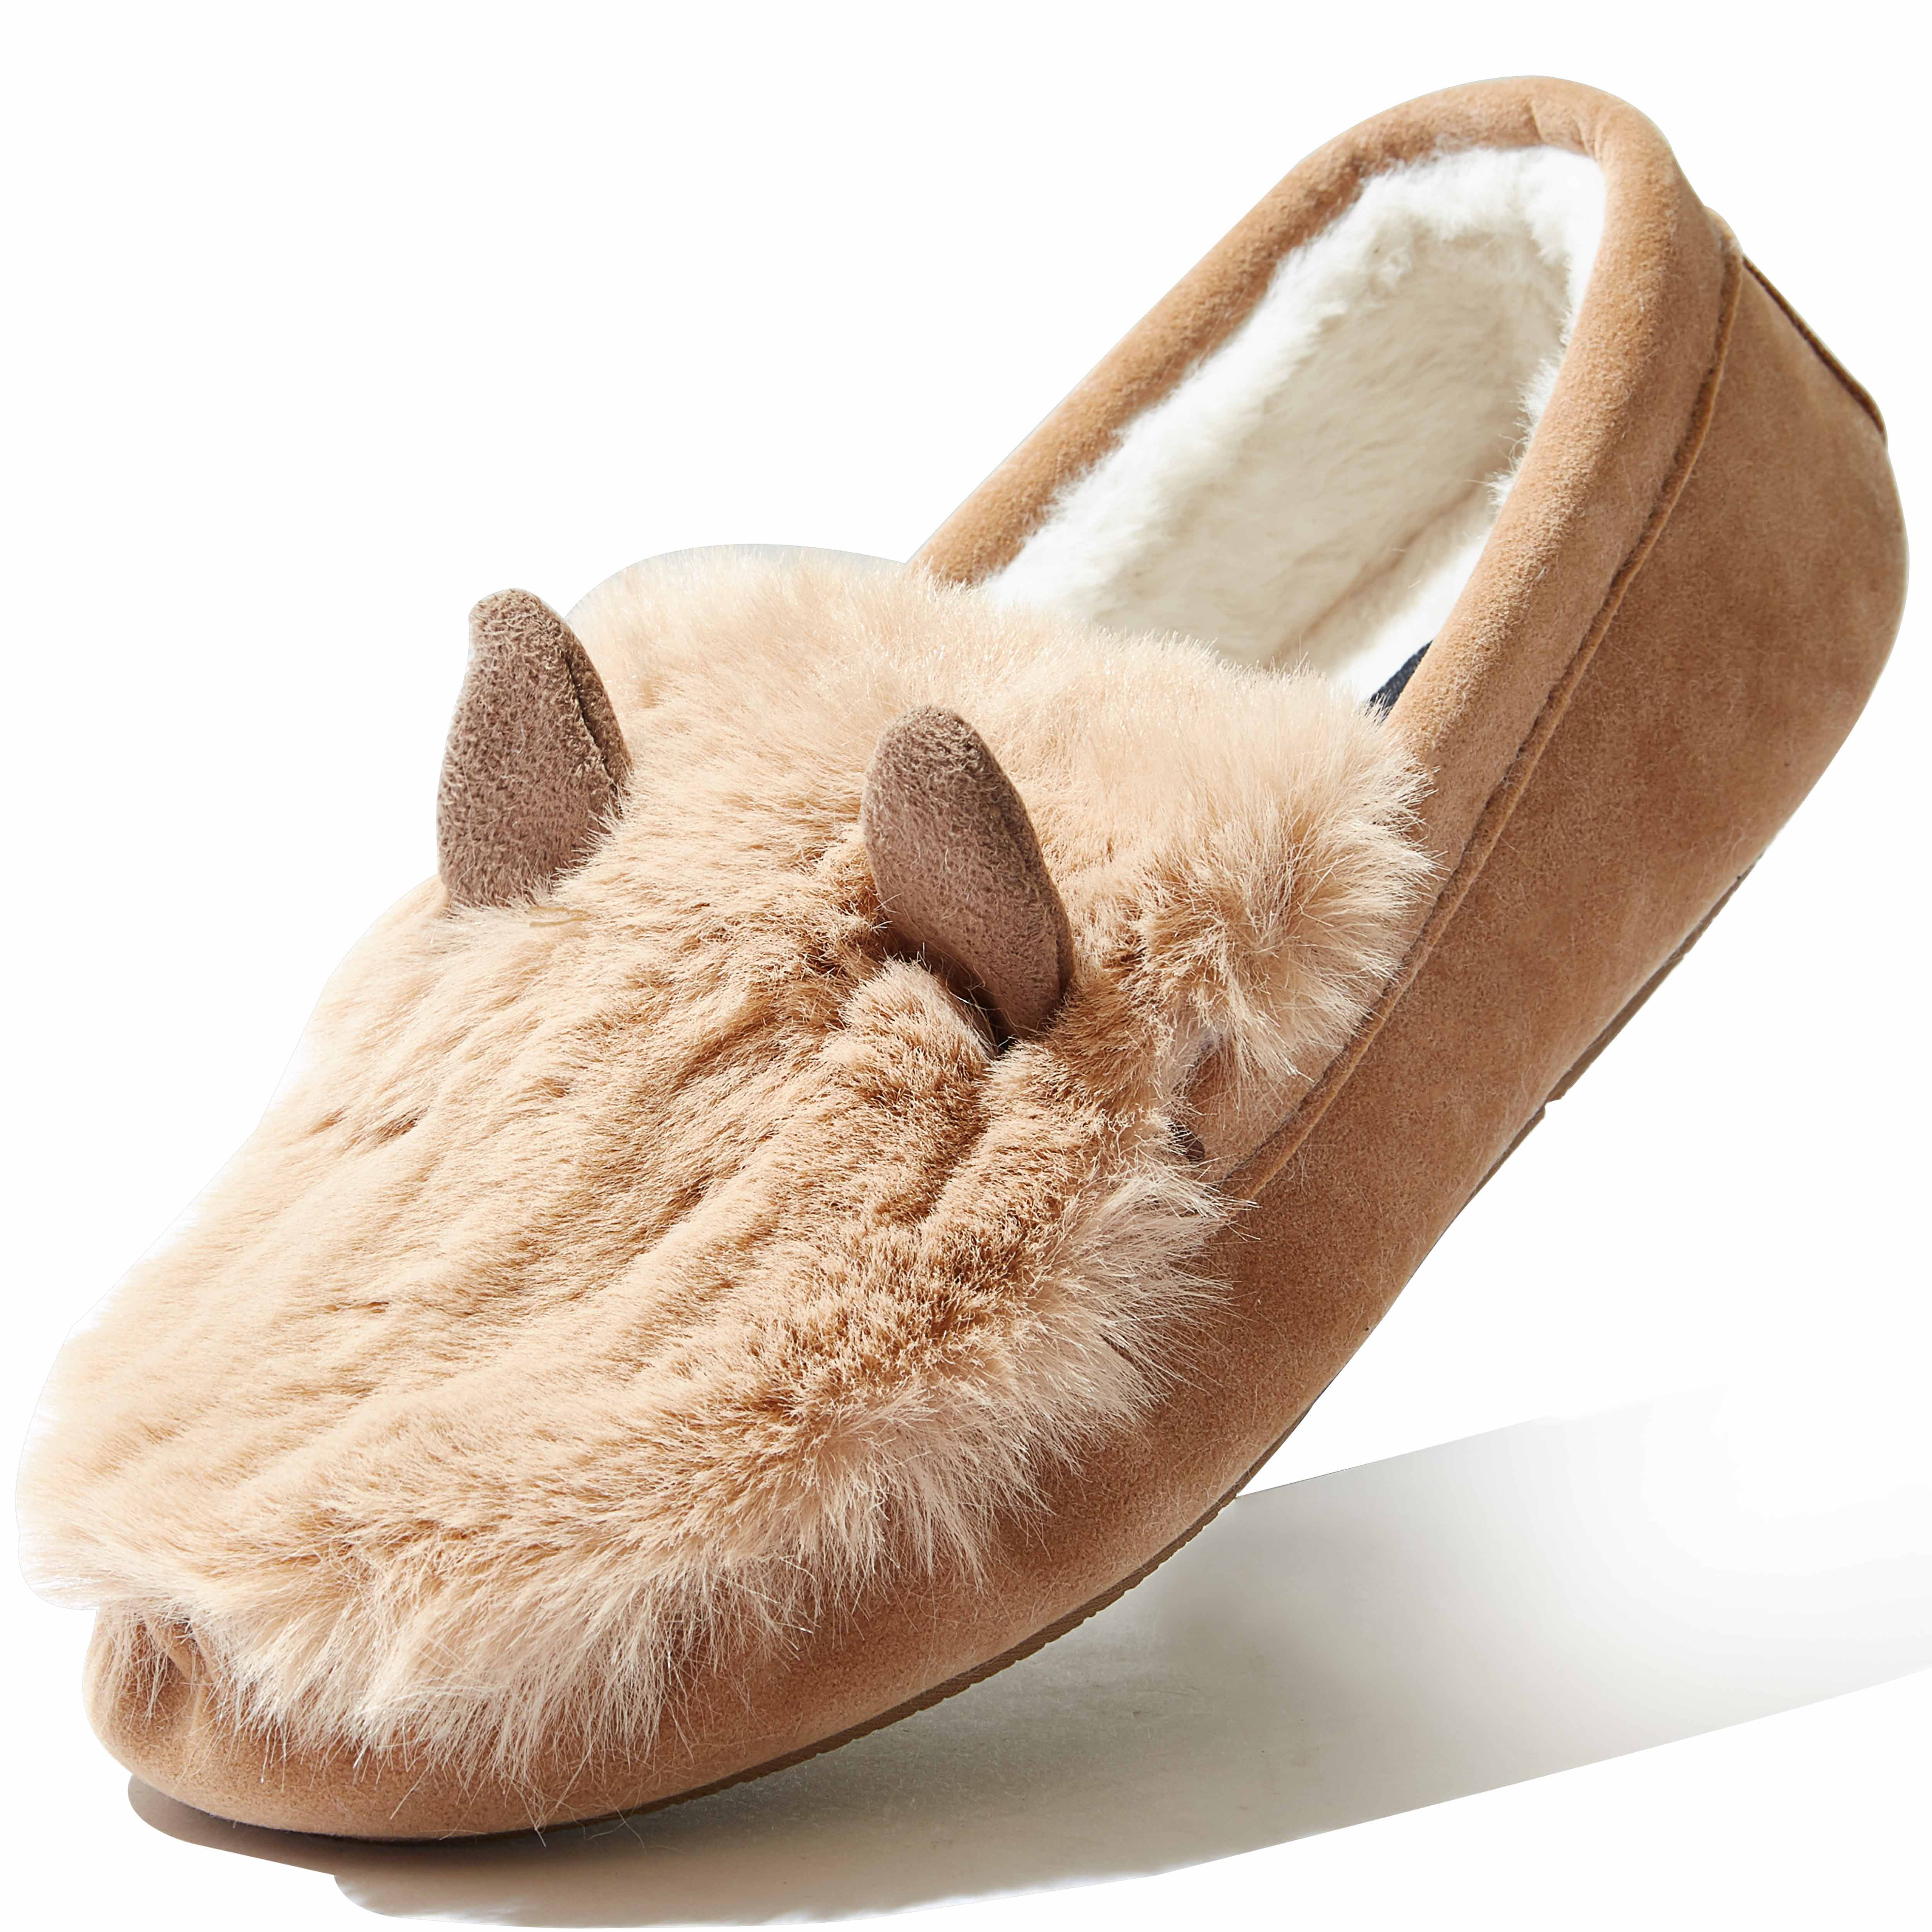 DailyShoes - DailyShoes Moccasin-Style 